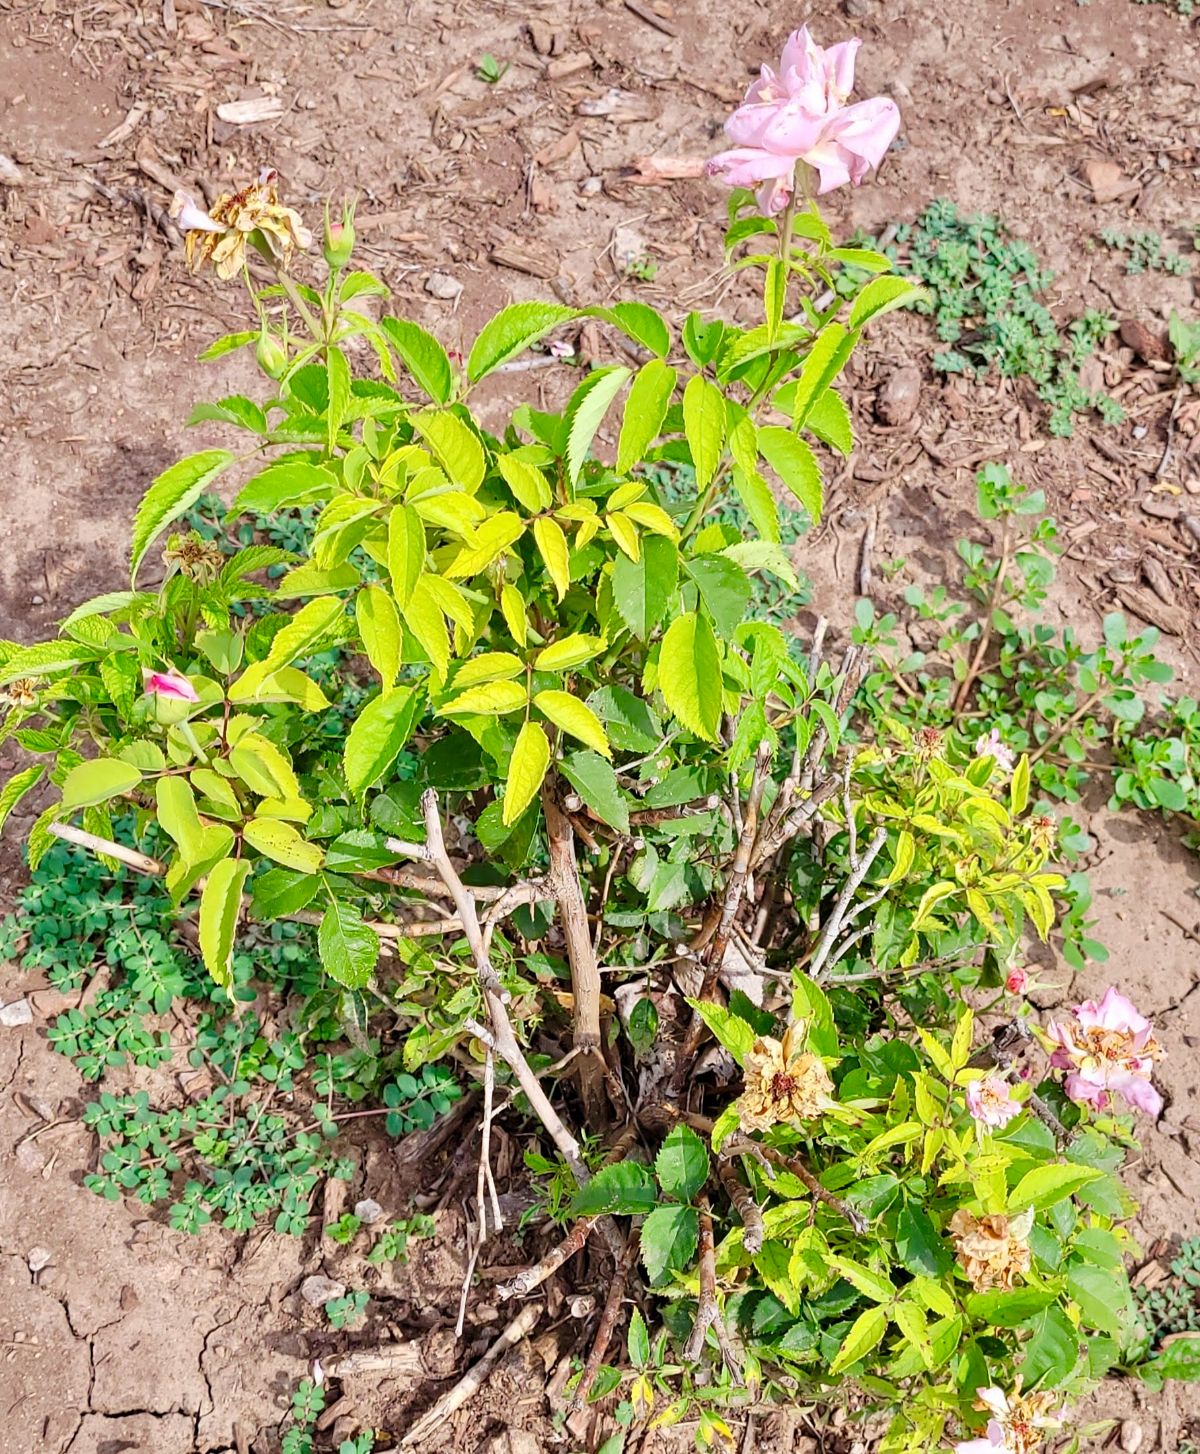 Rose Rosette Disease may result in light colored leaves, too